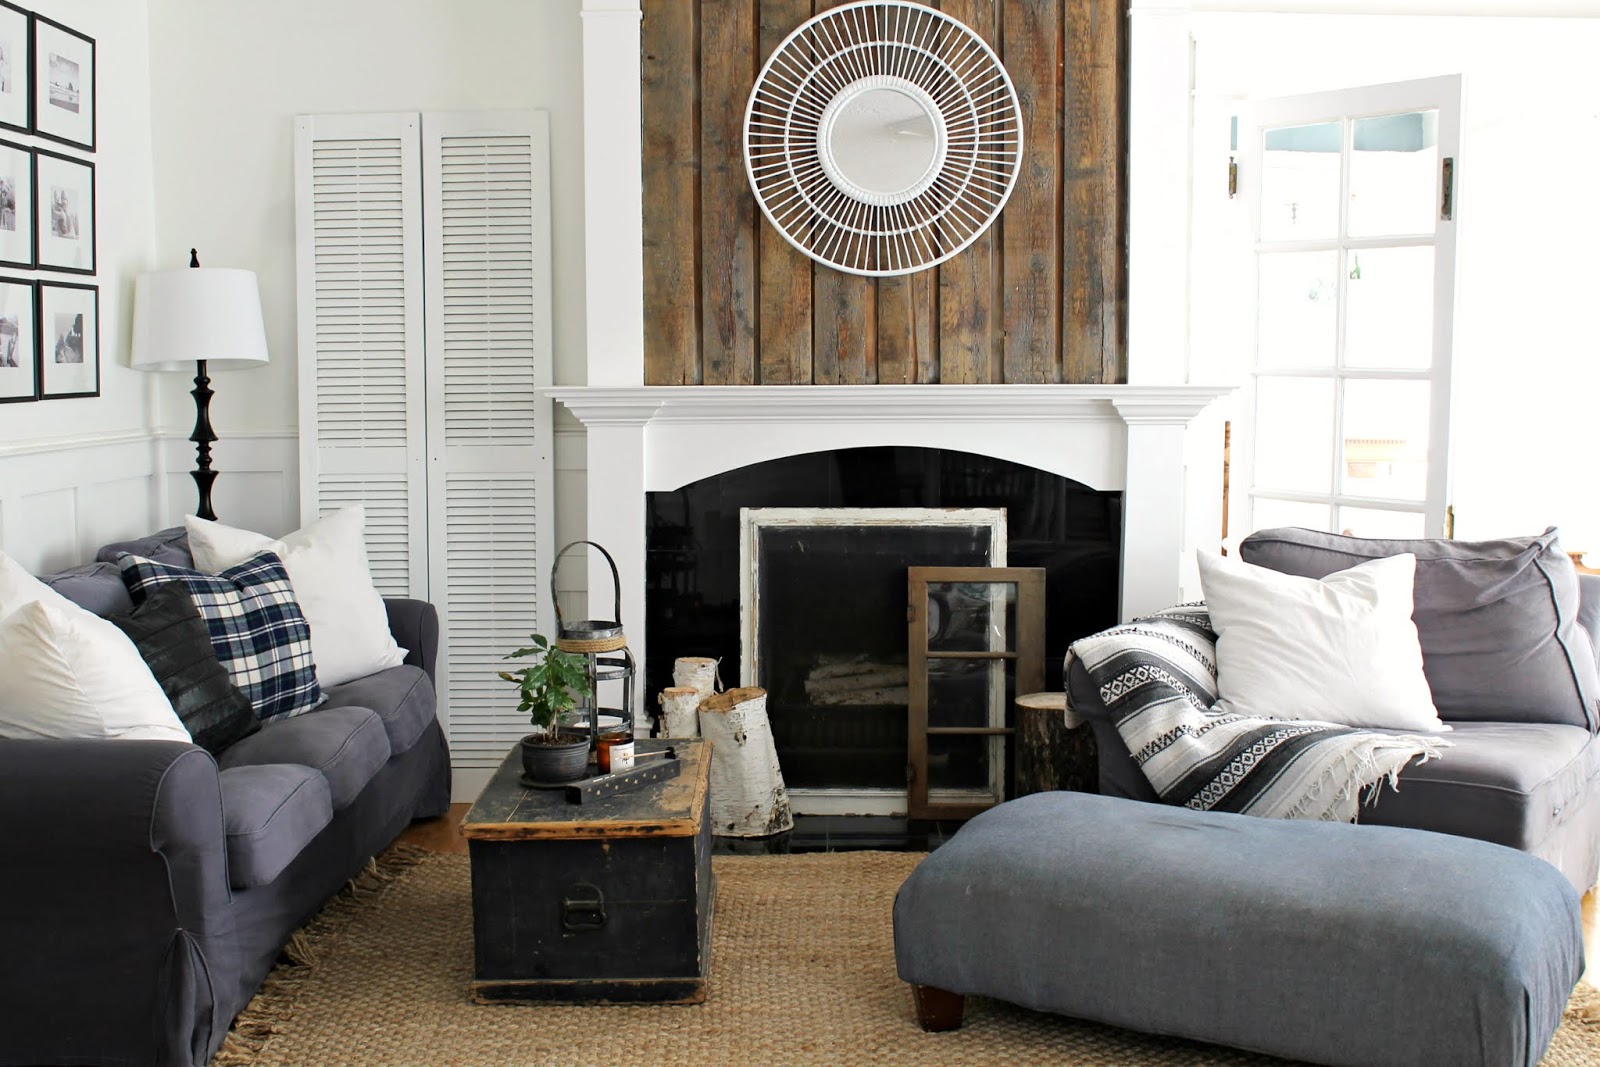 Fireplace Makeover – Rustic Wood Planks on Fireplace